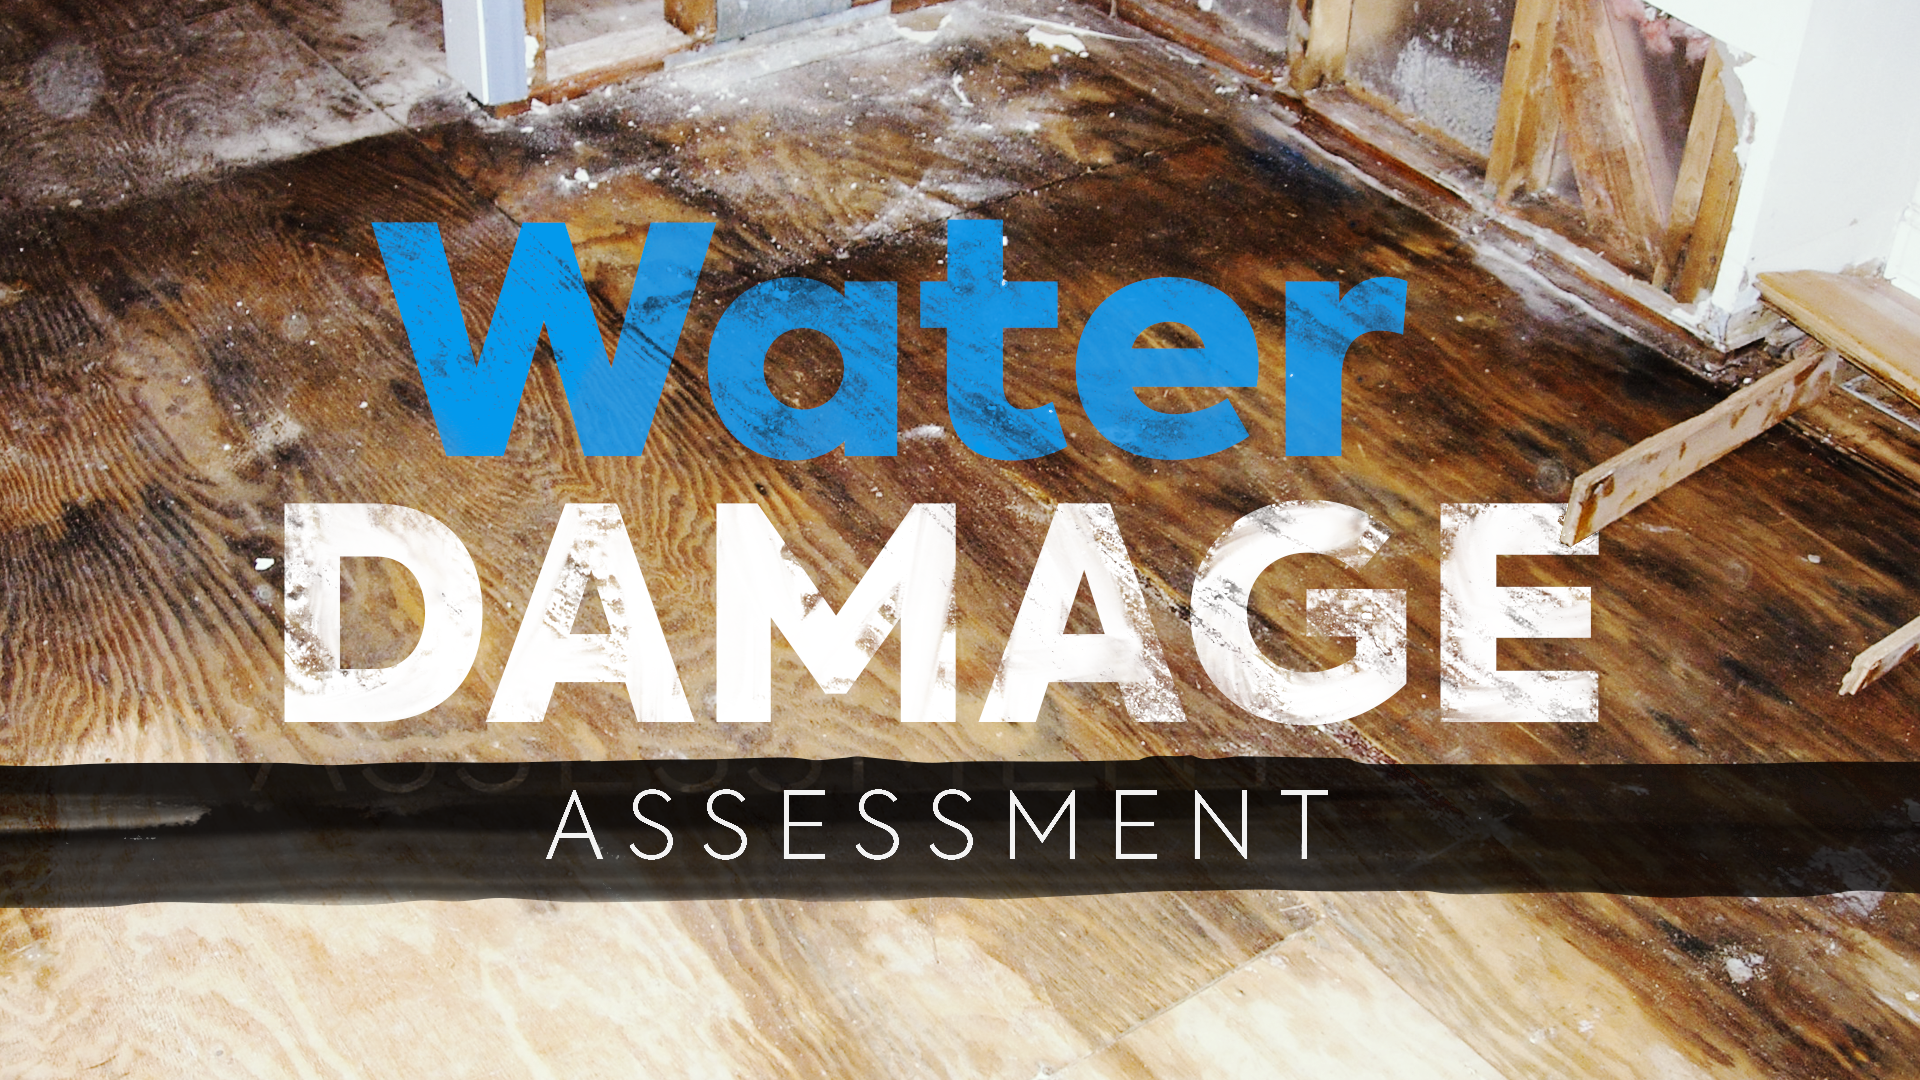 Water damage assessment